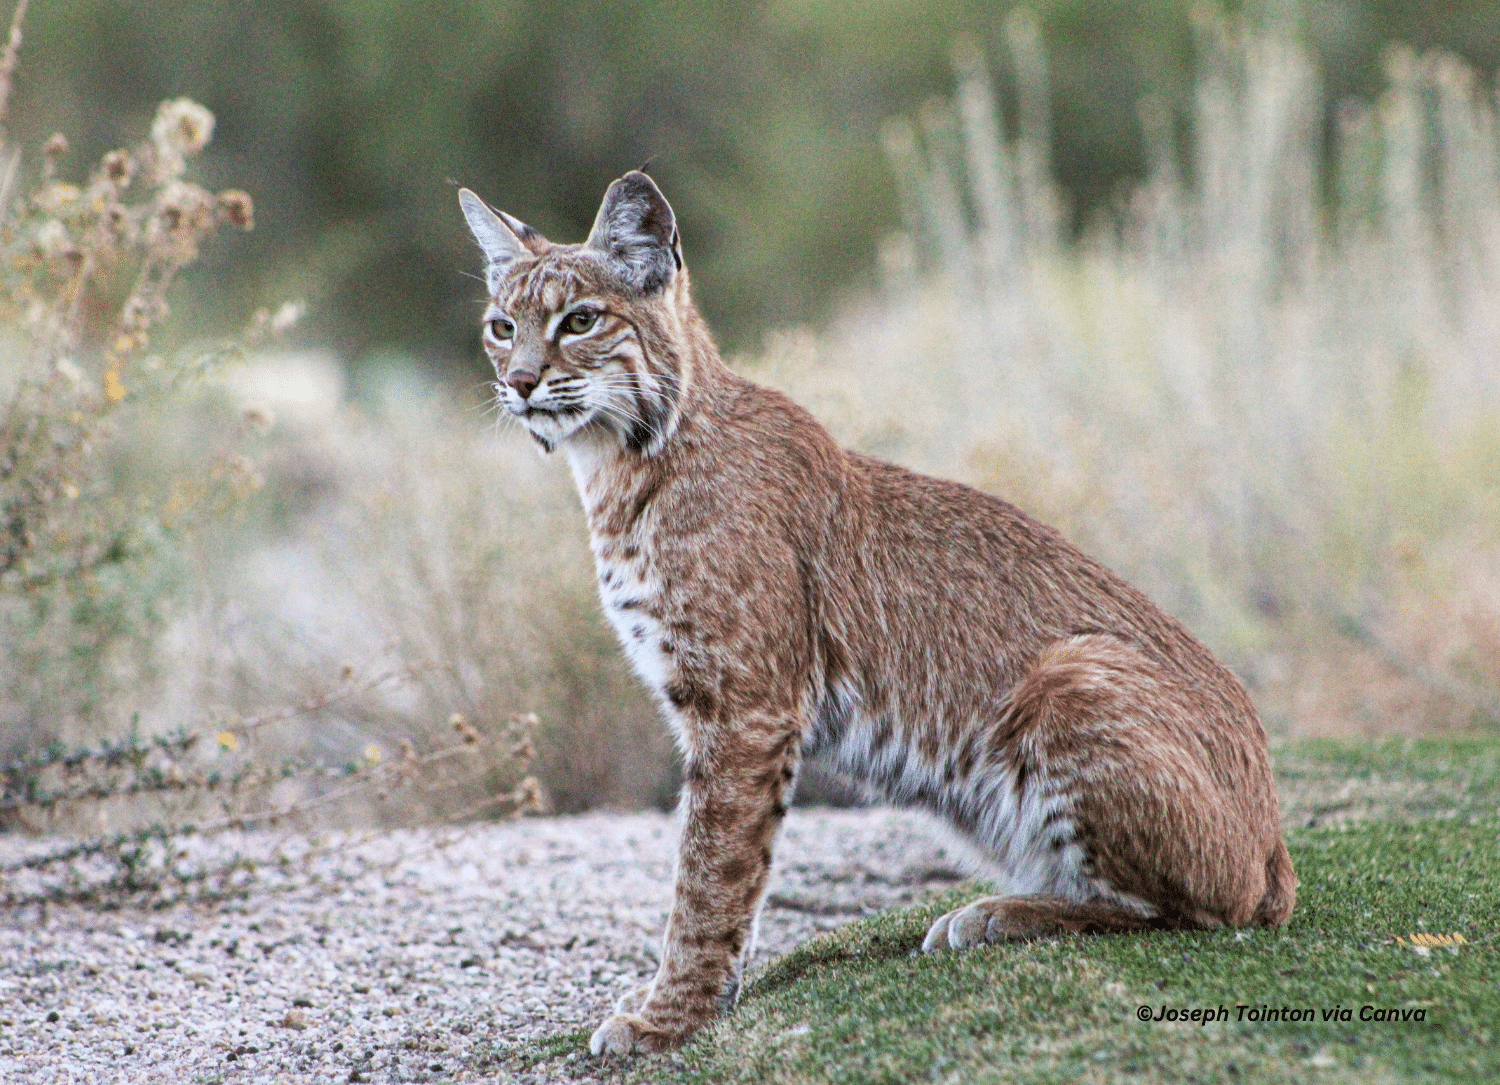 horizontal photo of a reddish-colored bobcat sitting on a grassy area with foliage in the background